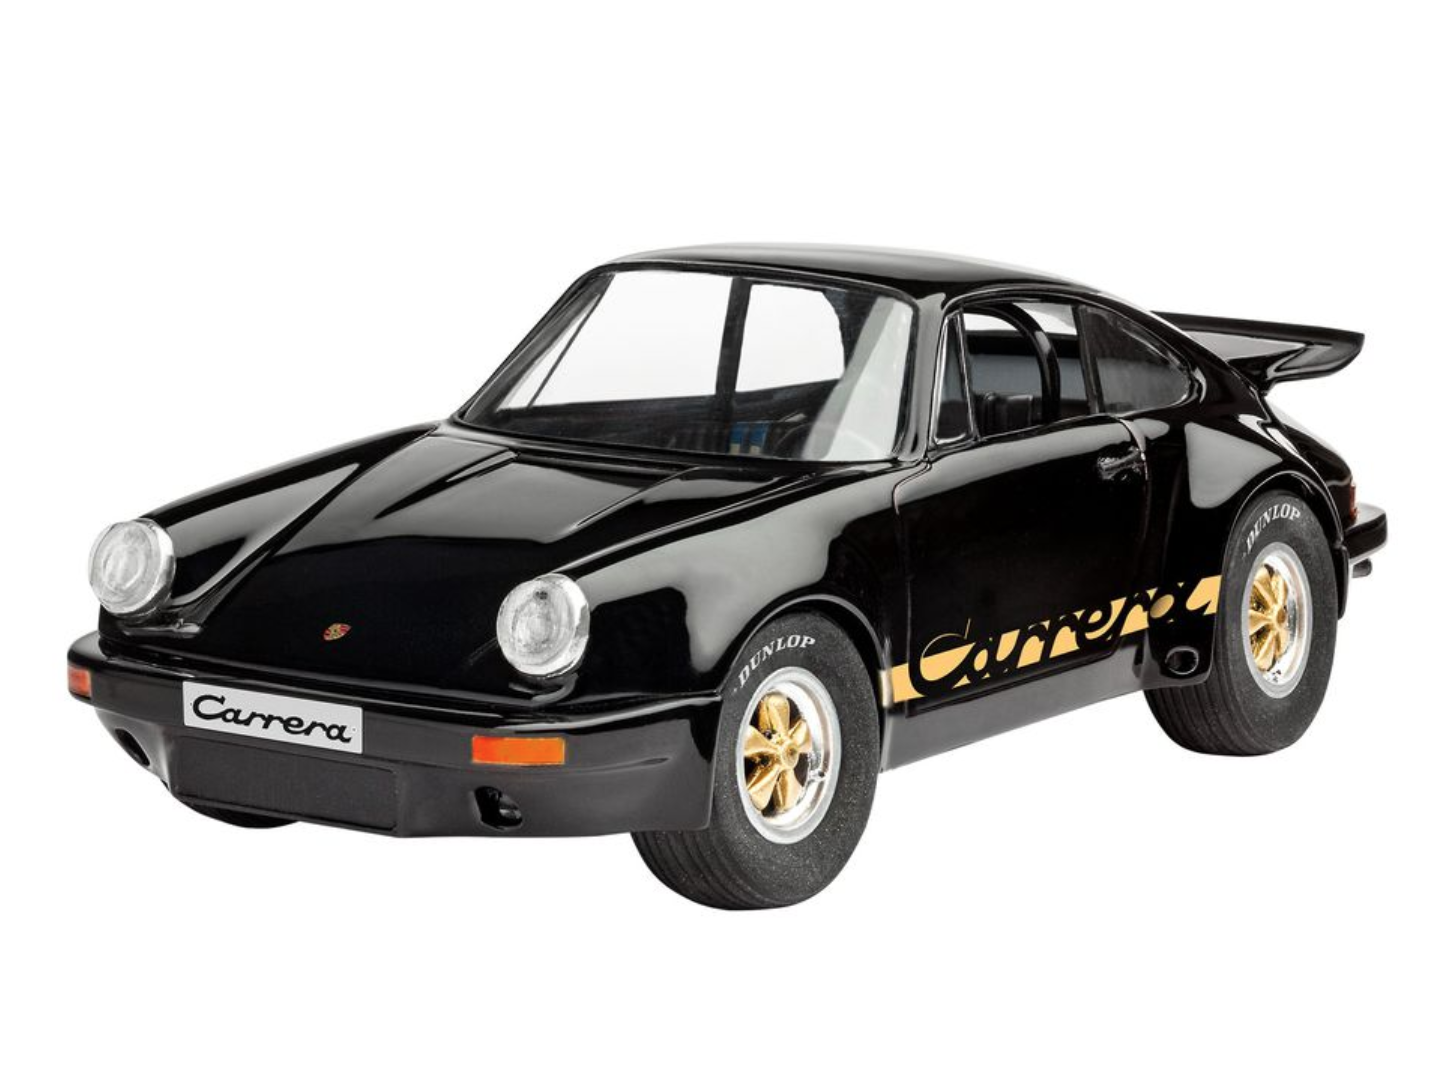 Porsche Carrera RS 3.0 Model Kit by Revell (125 scale